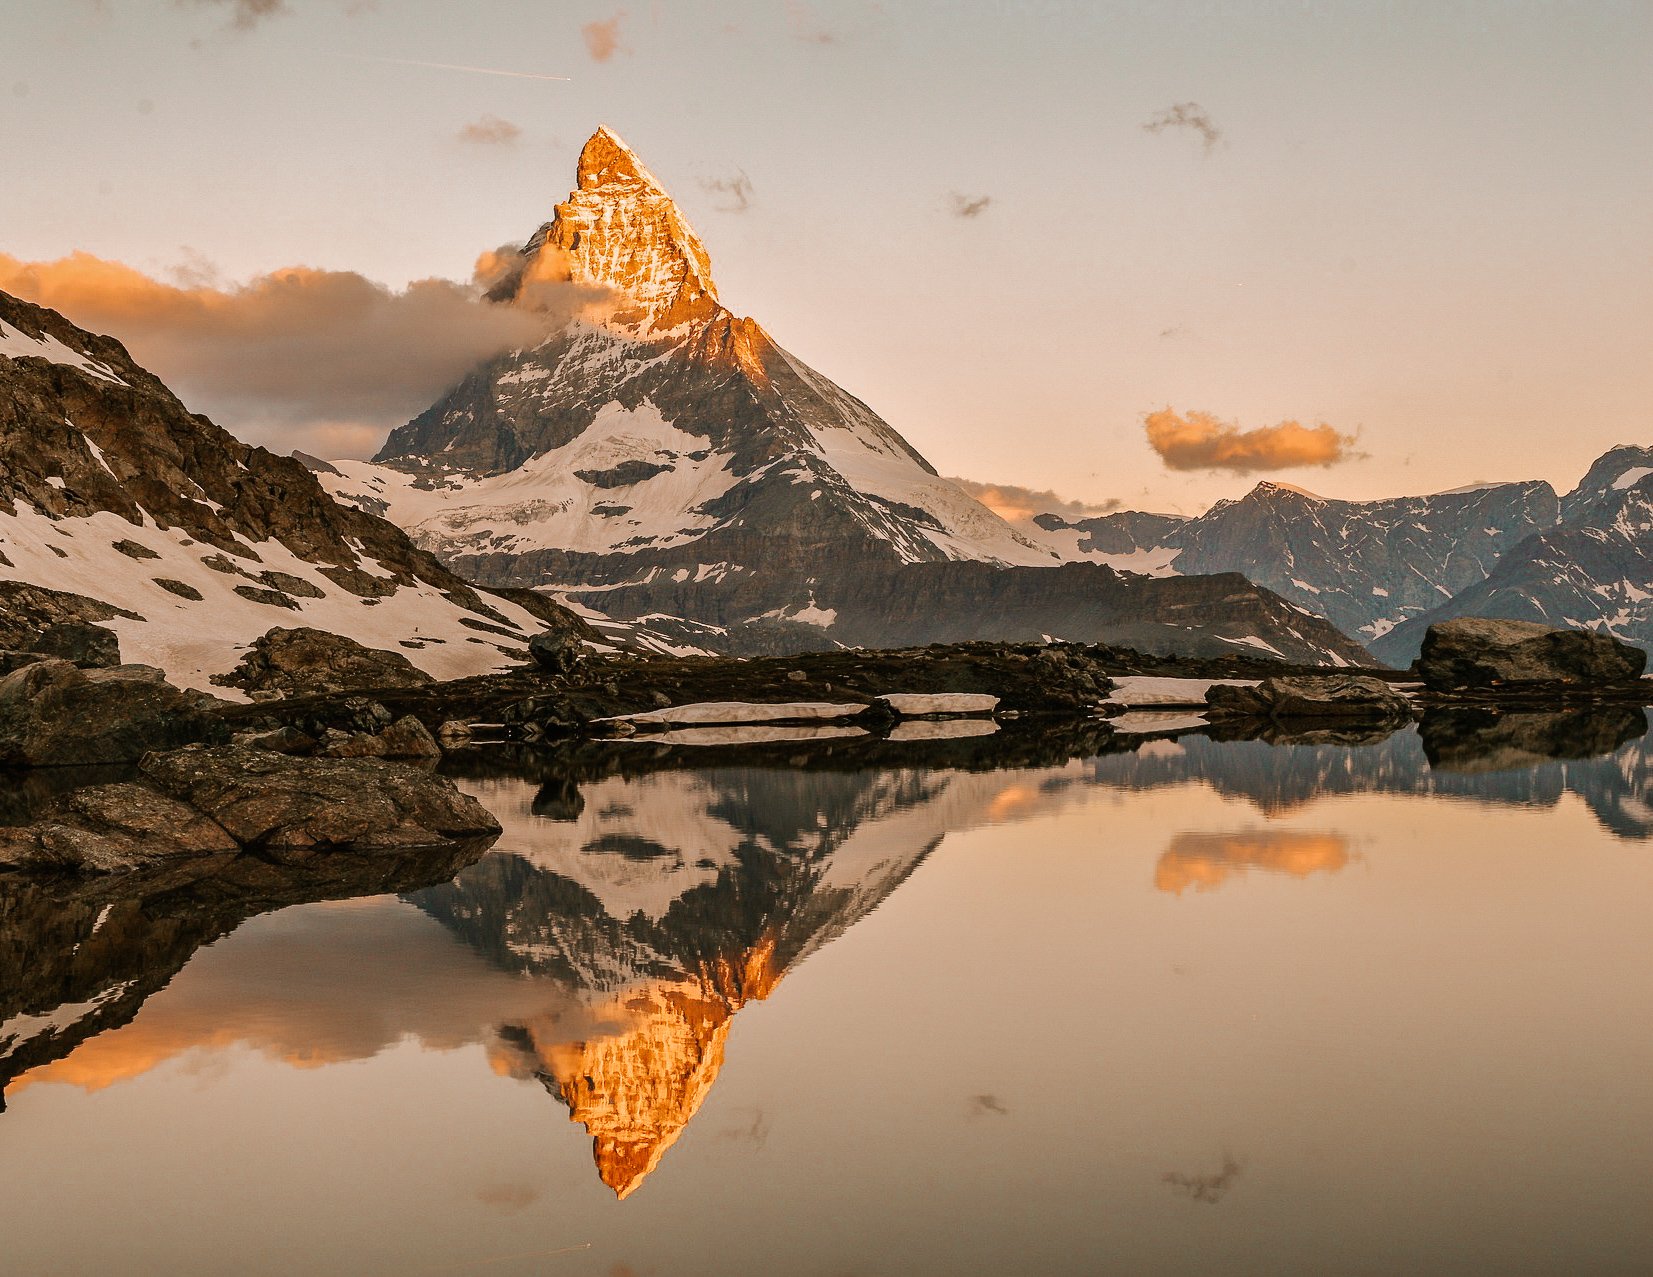 view of the Matterhorn near zermatt at sunrise above a lake with a perfect reflection on the lake surface. There is snow on Materhorn and the foreground, and the tip of Matterhorn is reflecting golden sunlight.